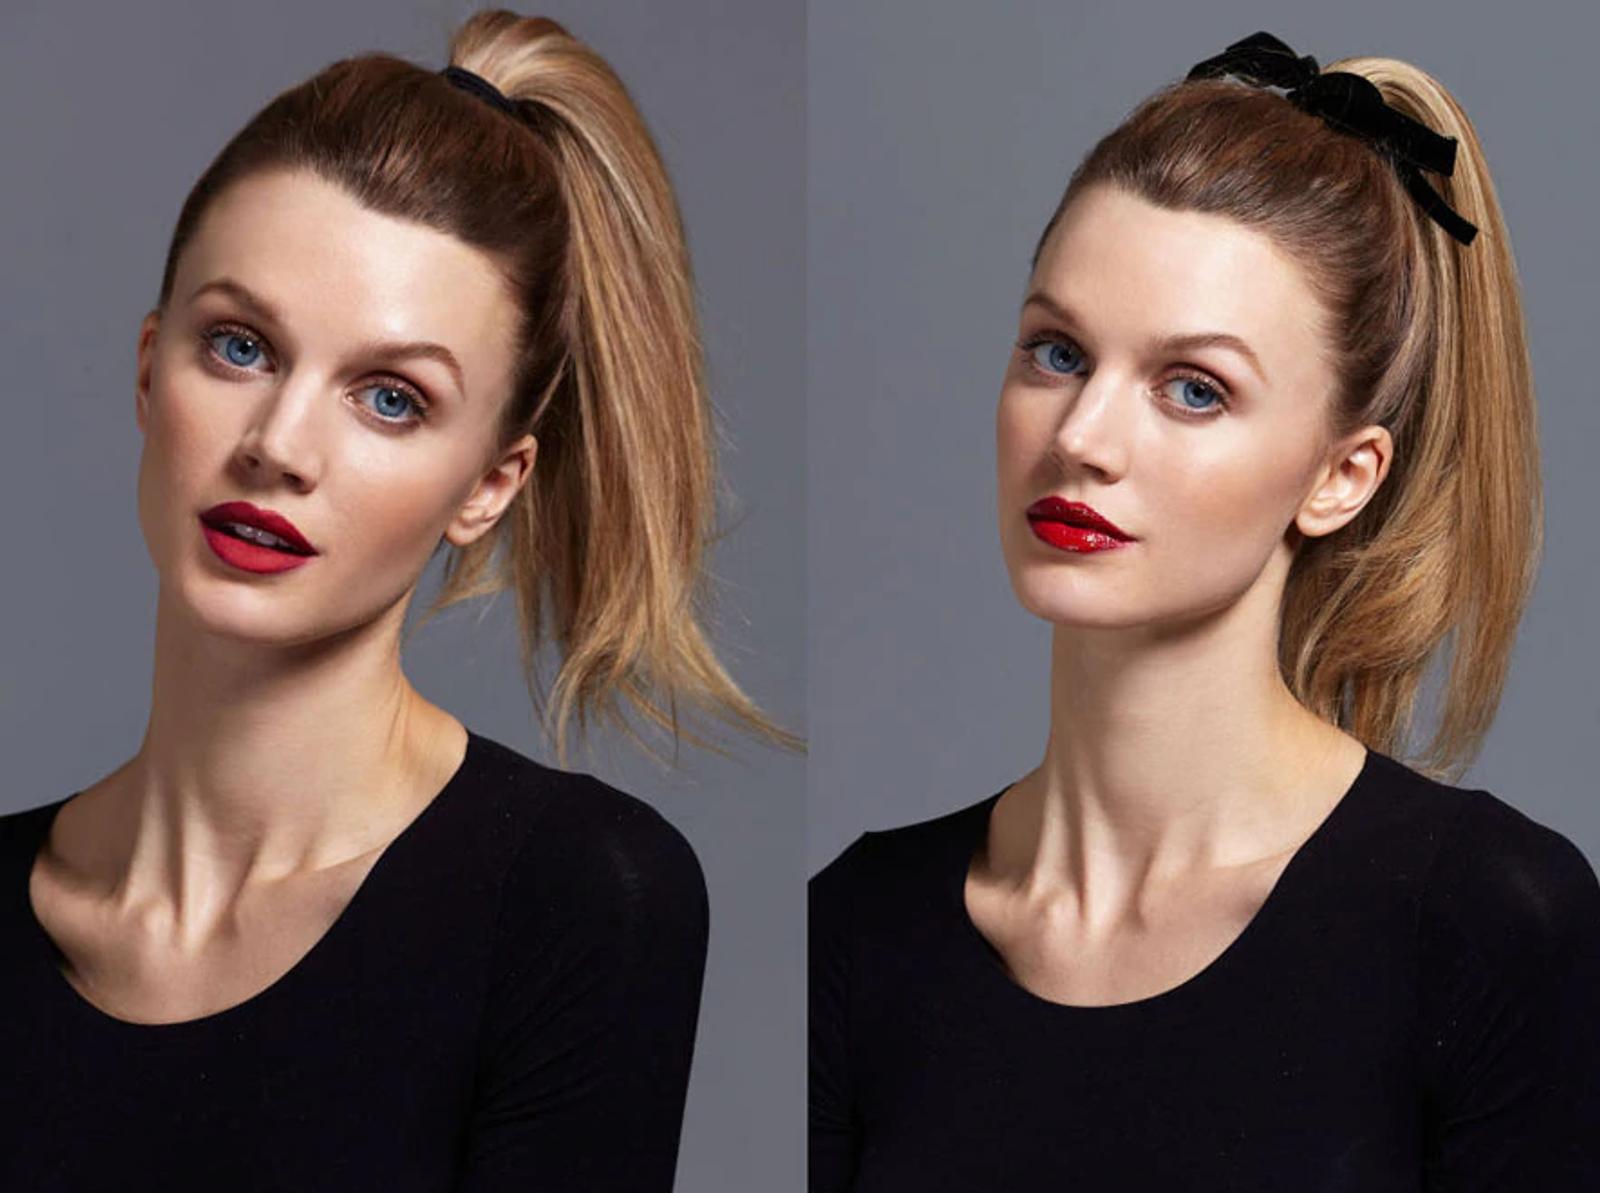 Image of Model with Ponytail and Image of Model with Ponytail and Black Ribbon